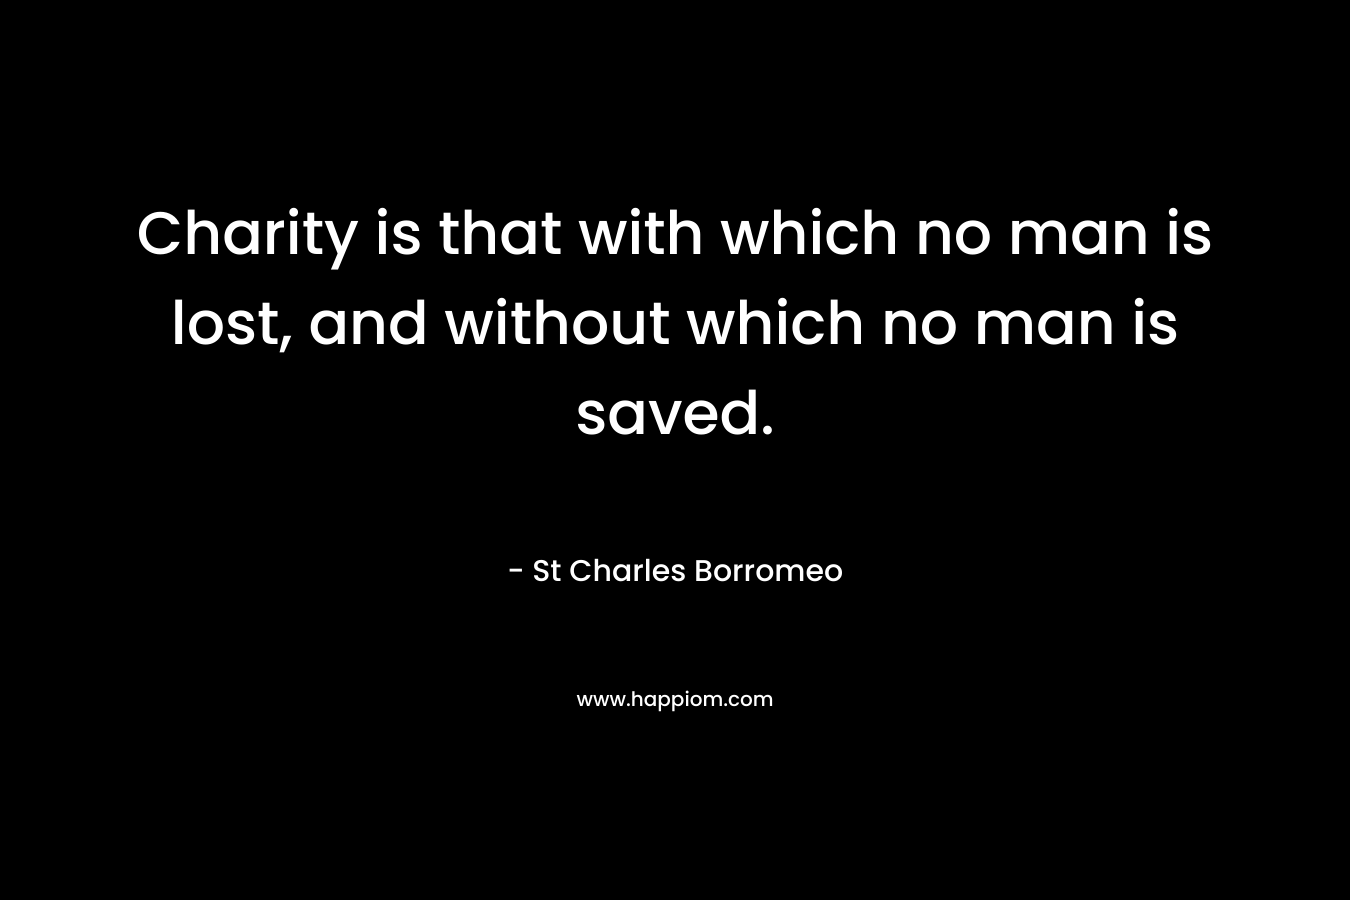 Charity is that with which no man is lost, and without which no man is saved. – St Charles Borromeo